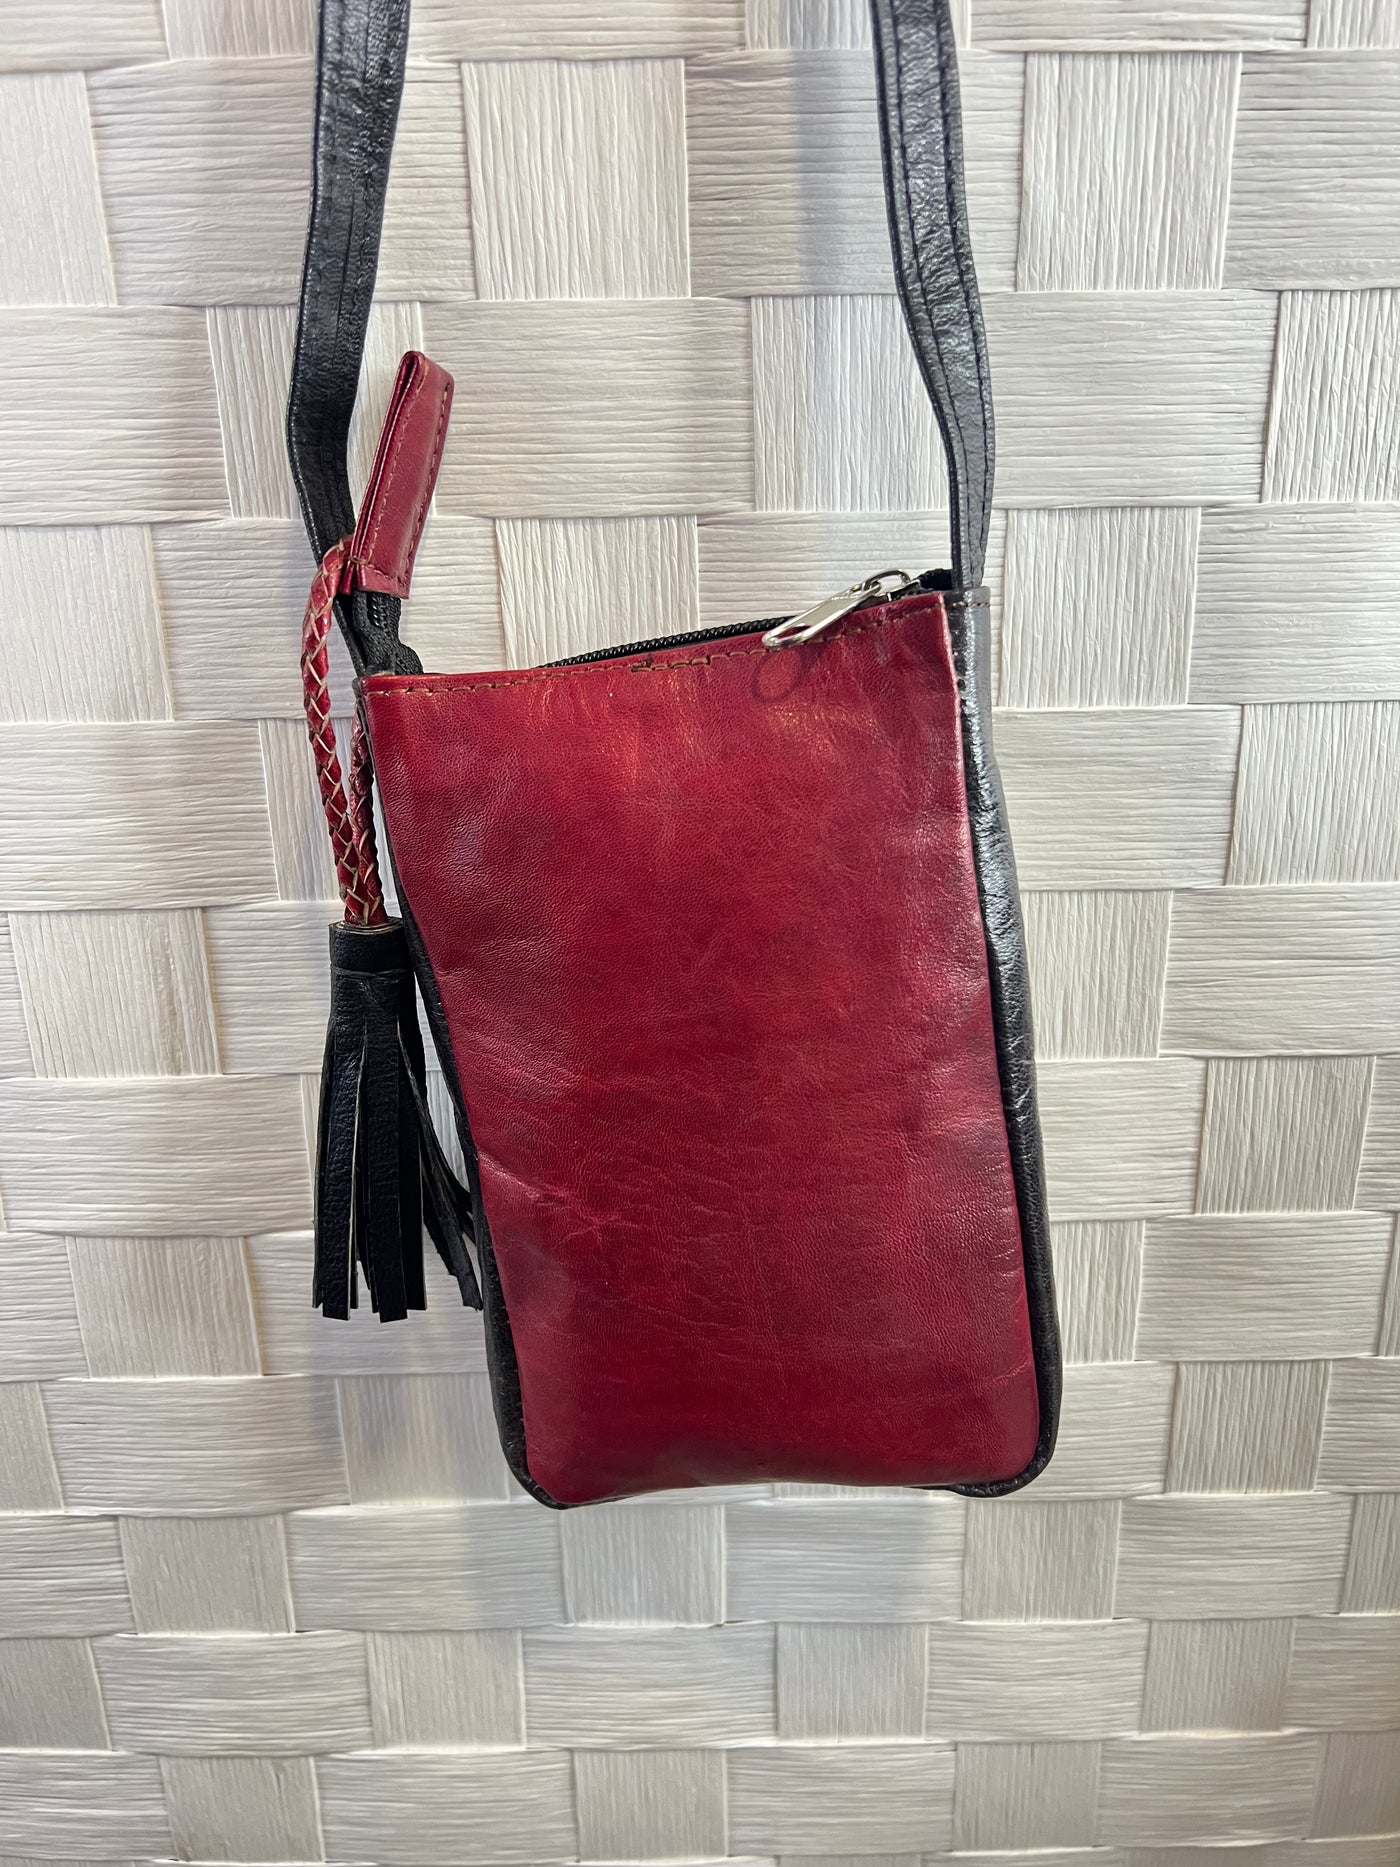 Handmade Leather Crossbody Bag for Phone and Small Accessories - Mali Craftsmanship